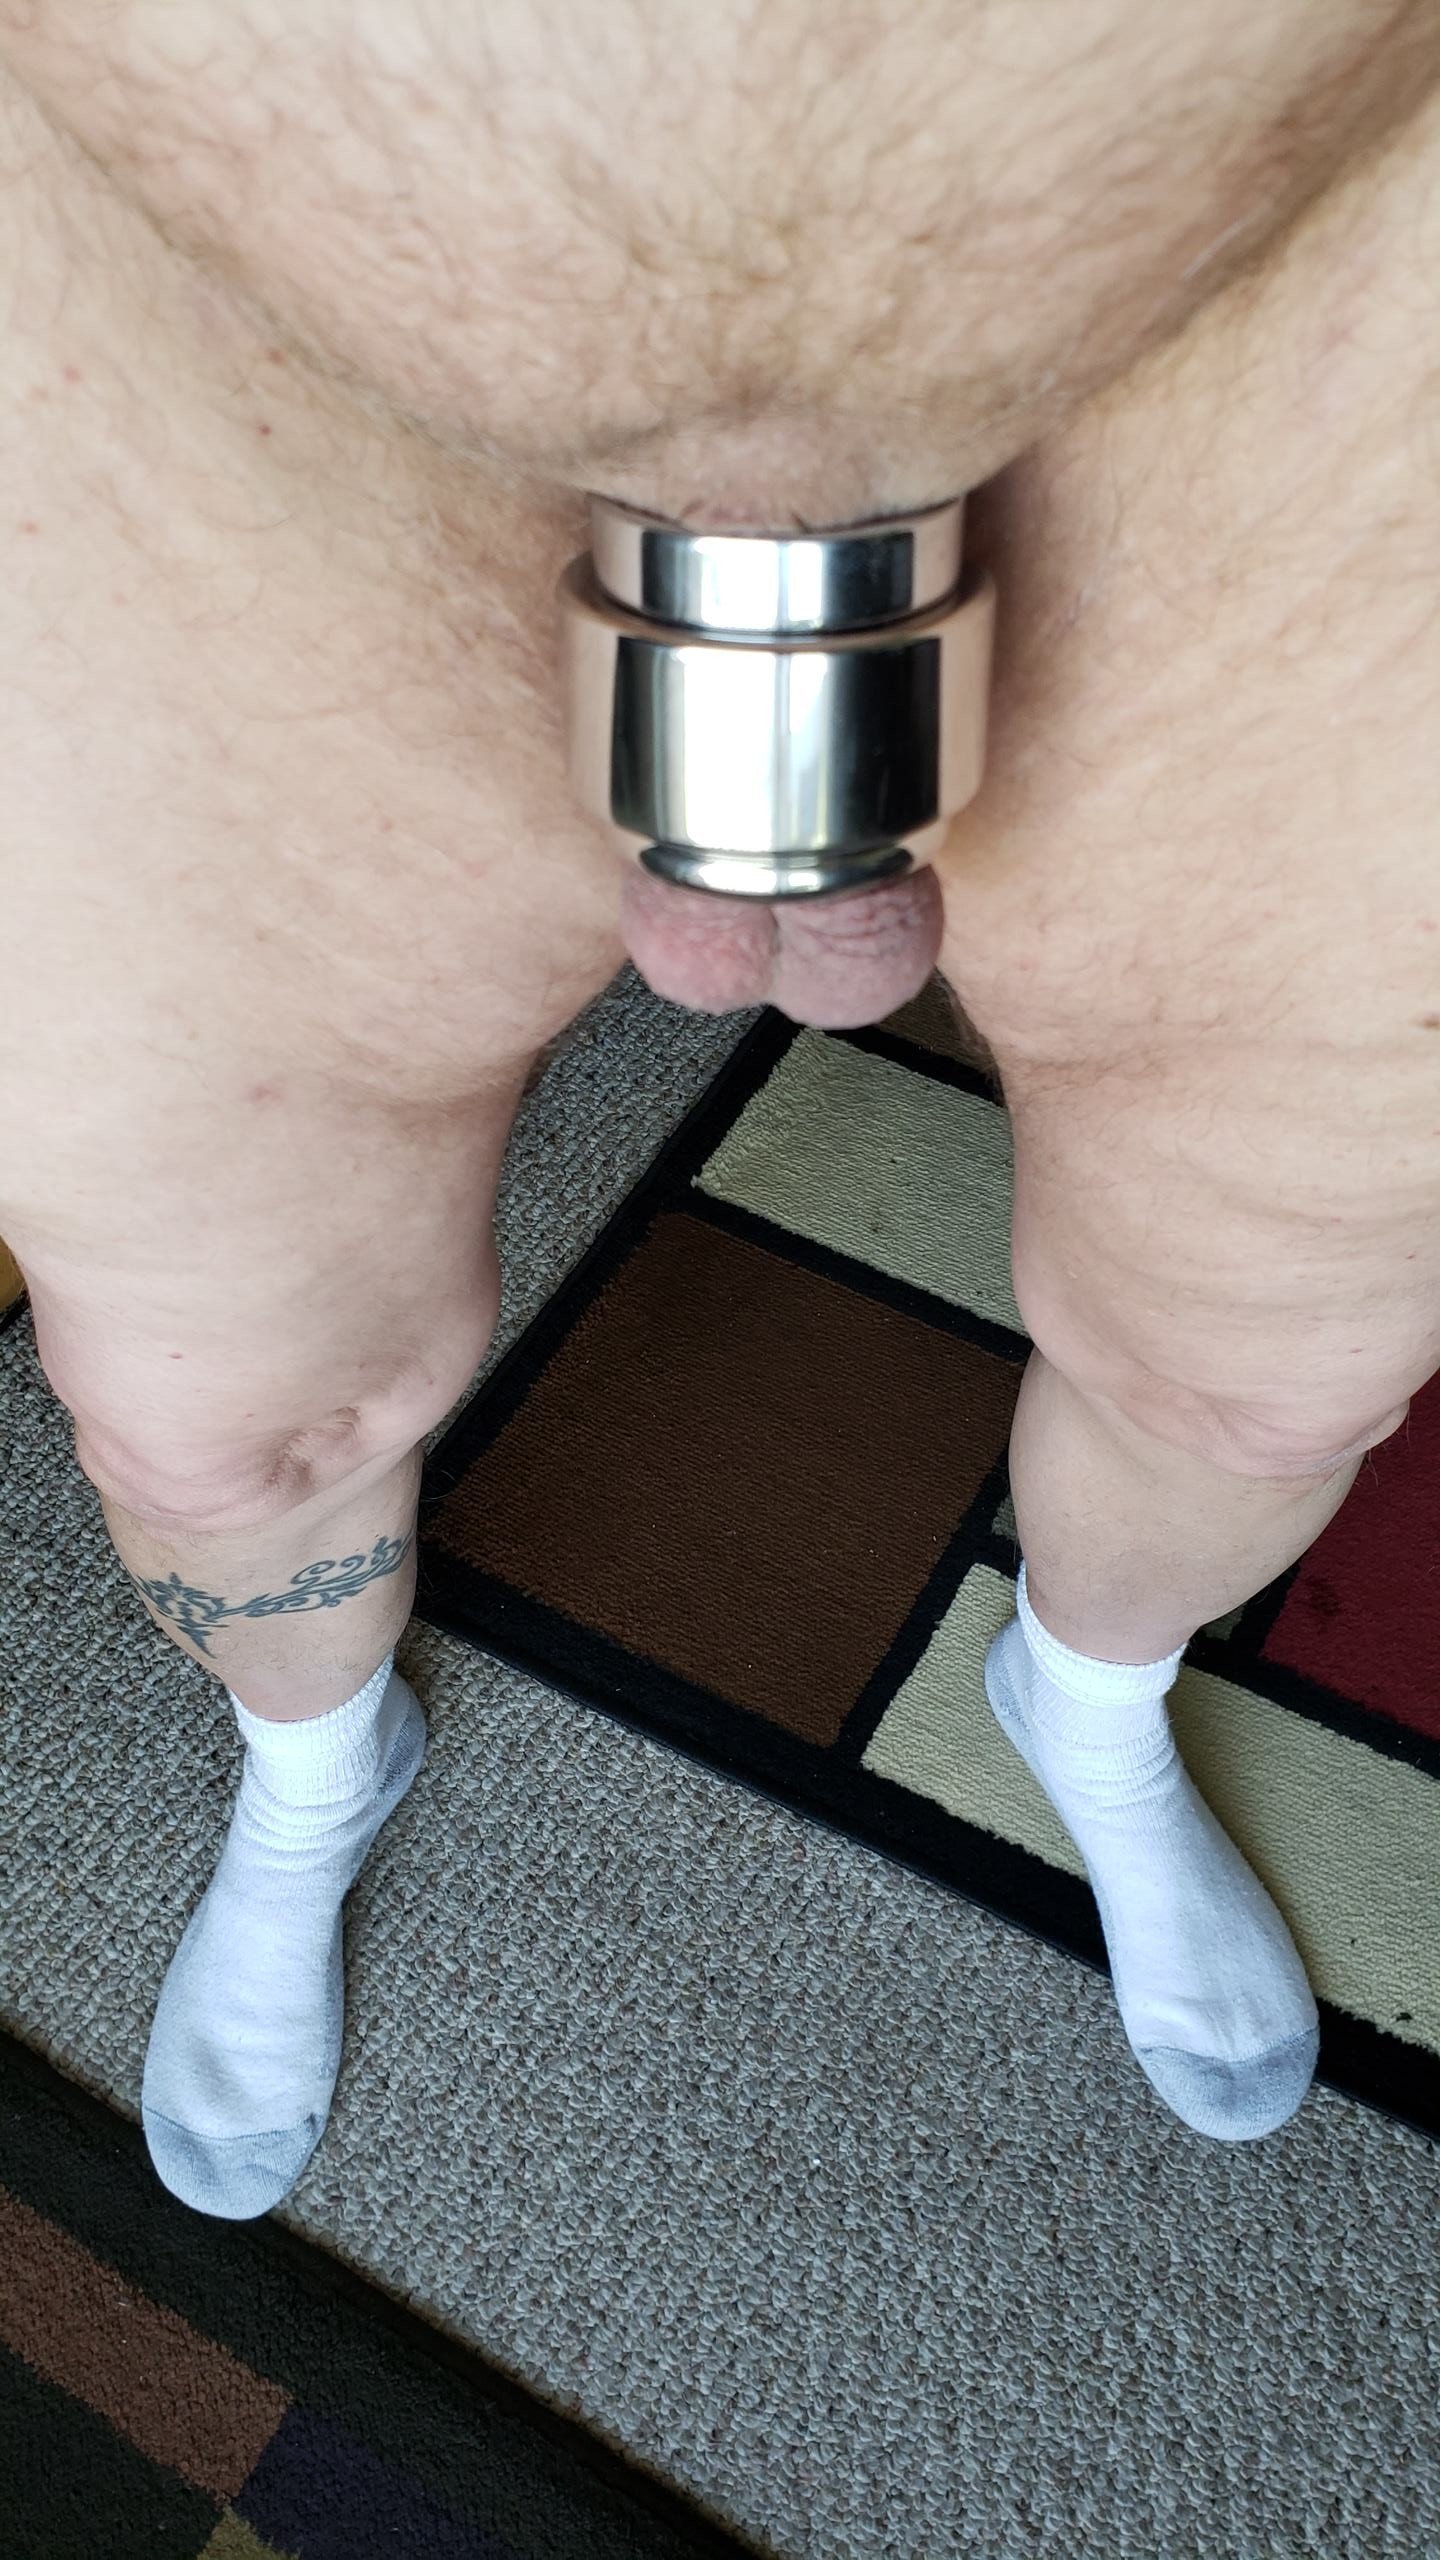 Photo by BearCub & Redwolf with the username @BearCub36, who is a verified user,  May 6, 2024 at 8:16 PM. The post is about the topic Male Chastity and the text says 'BearCub - Tucked and stretched...
#gay #bearcub36 #cock #dick #penis #cockring #balls #shaved #tinydick #tinypenis #foreskin #tucked #dickless #fetish #smalldick #smallcock #micropenis #flaccid #chastity #chastitycage #malechastity #cage #lockdown..'